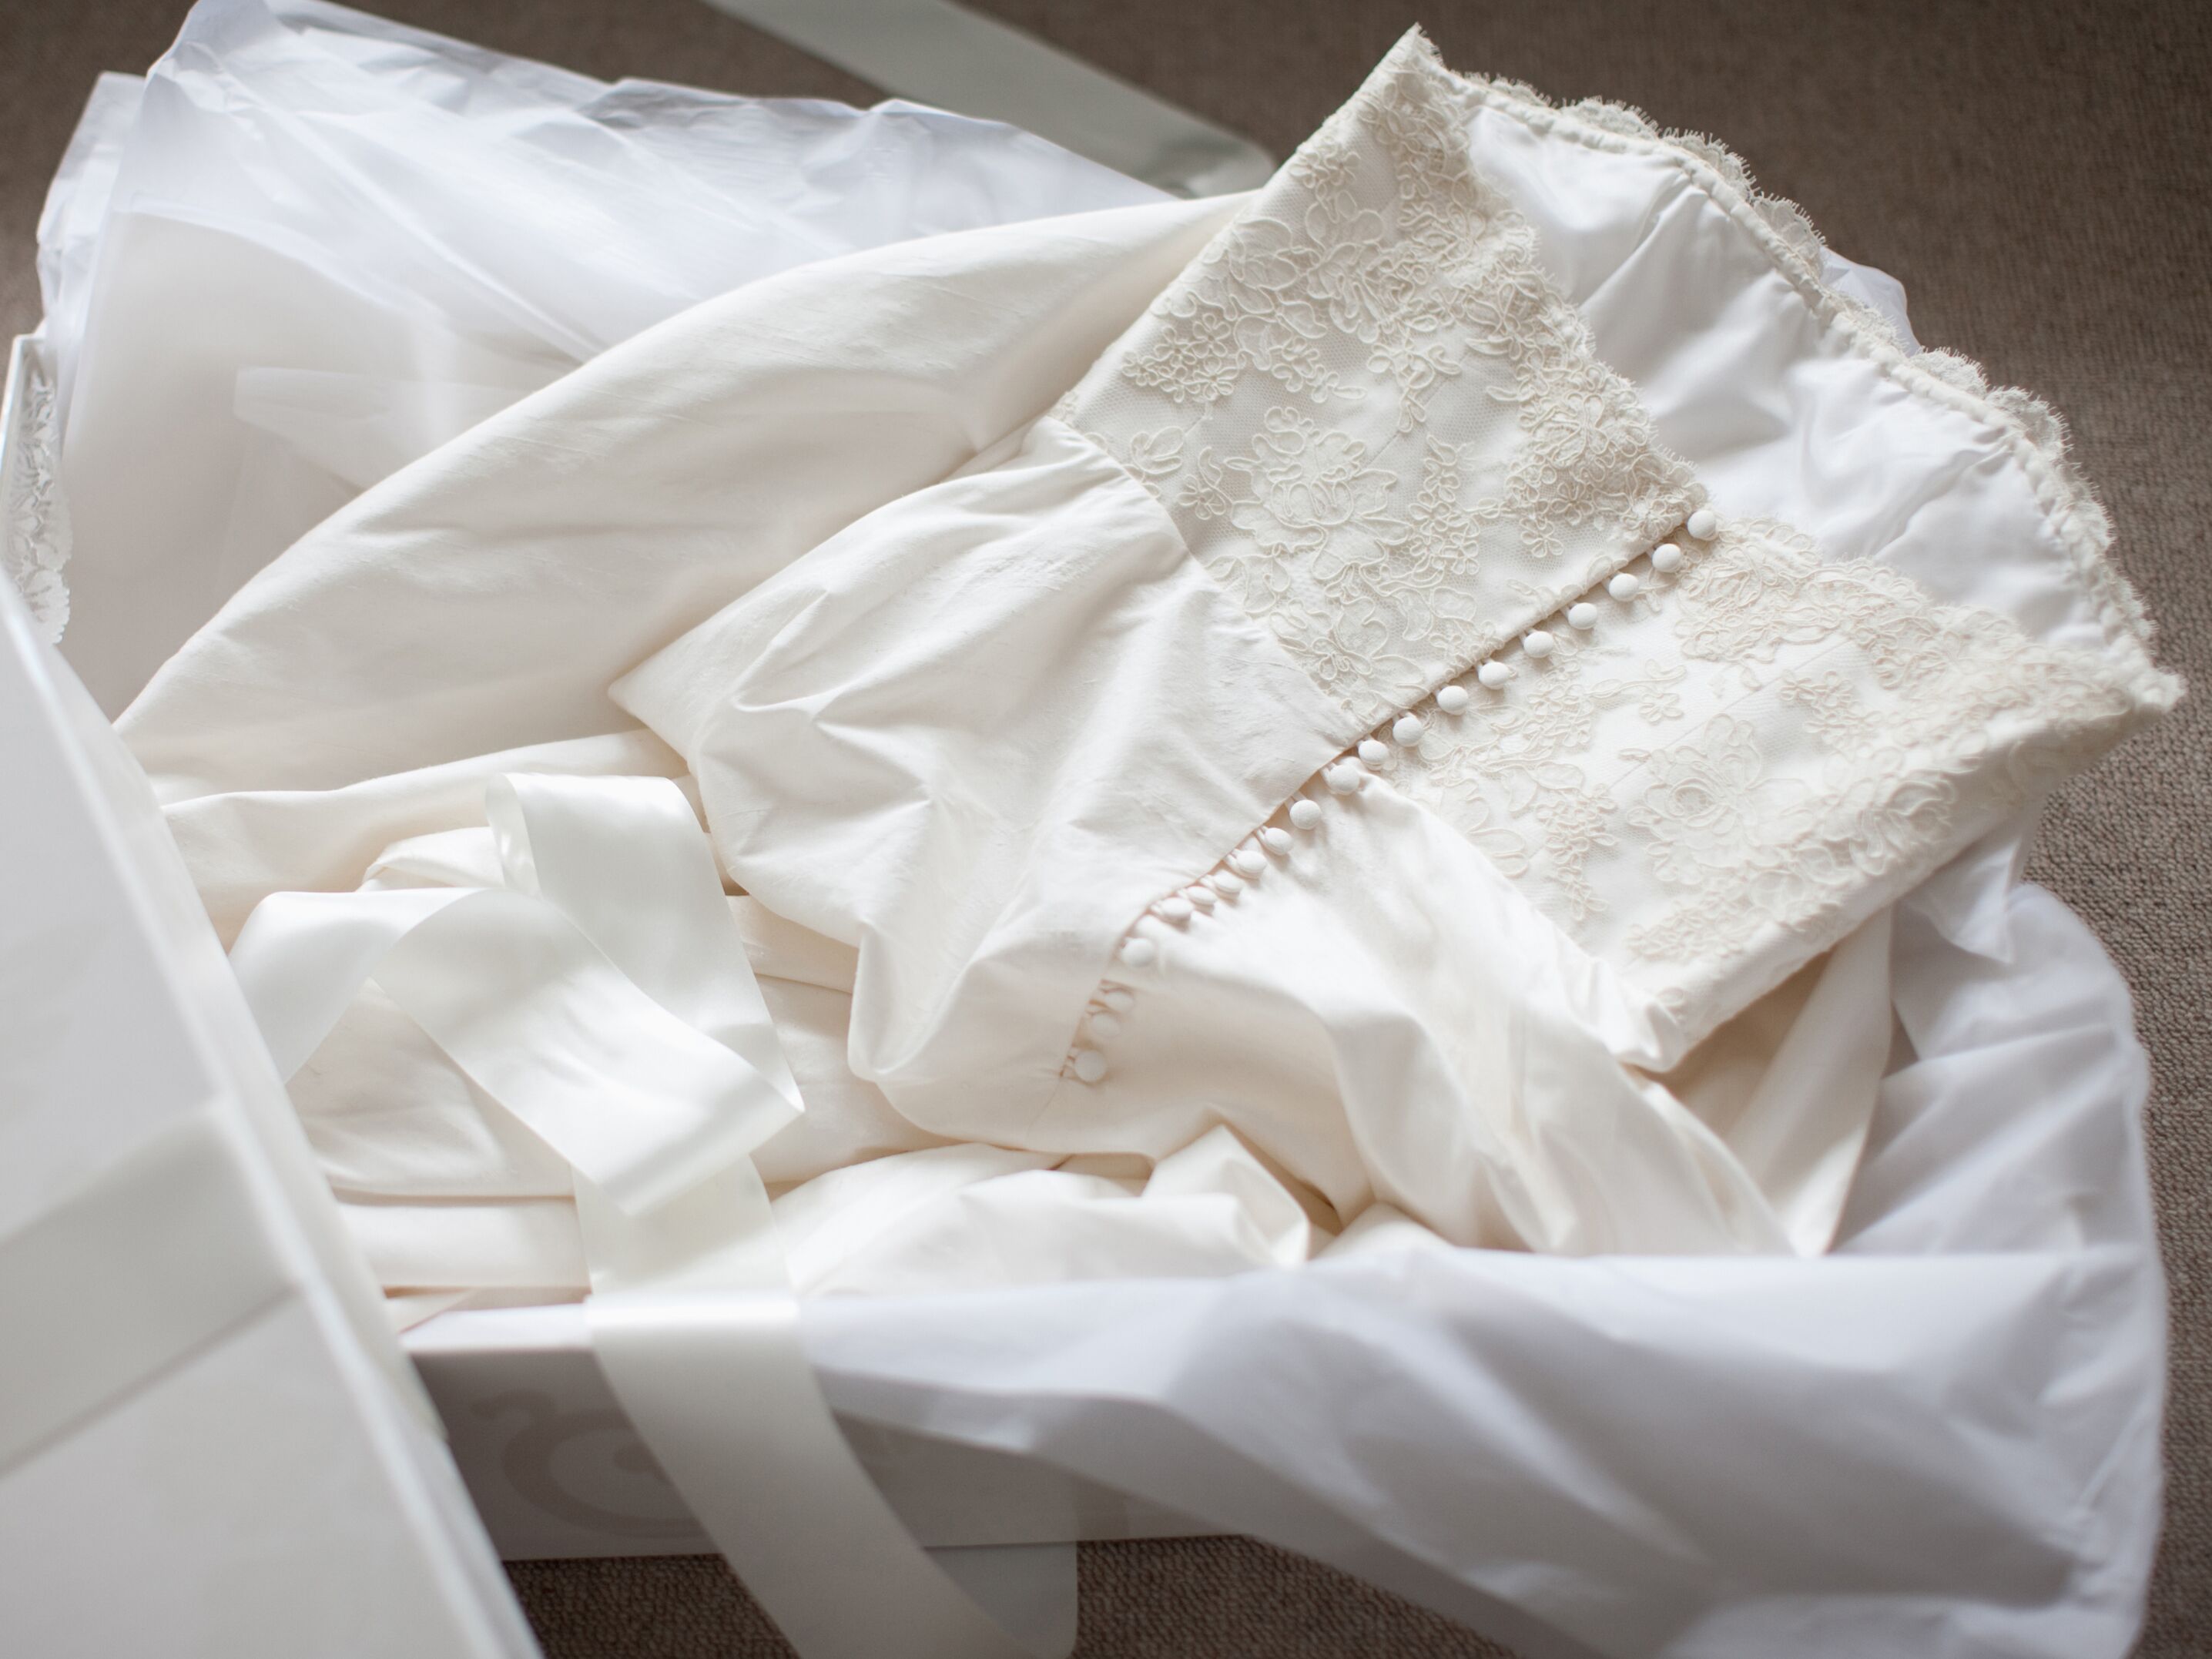 Used Wedding Dresses: Where to Buy and Sell Online